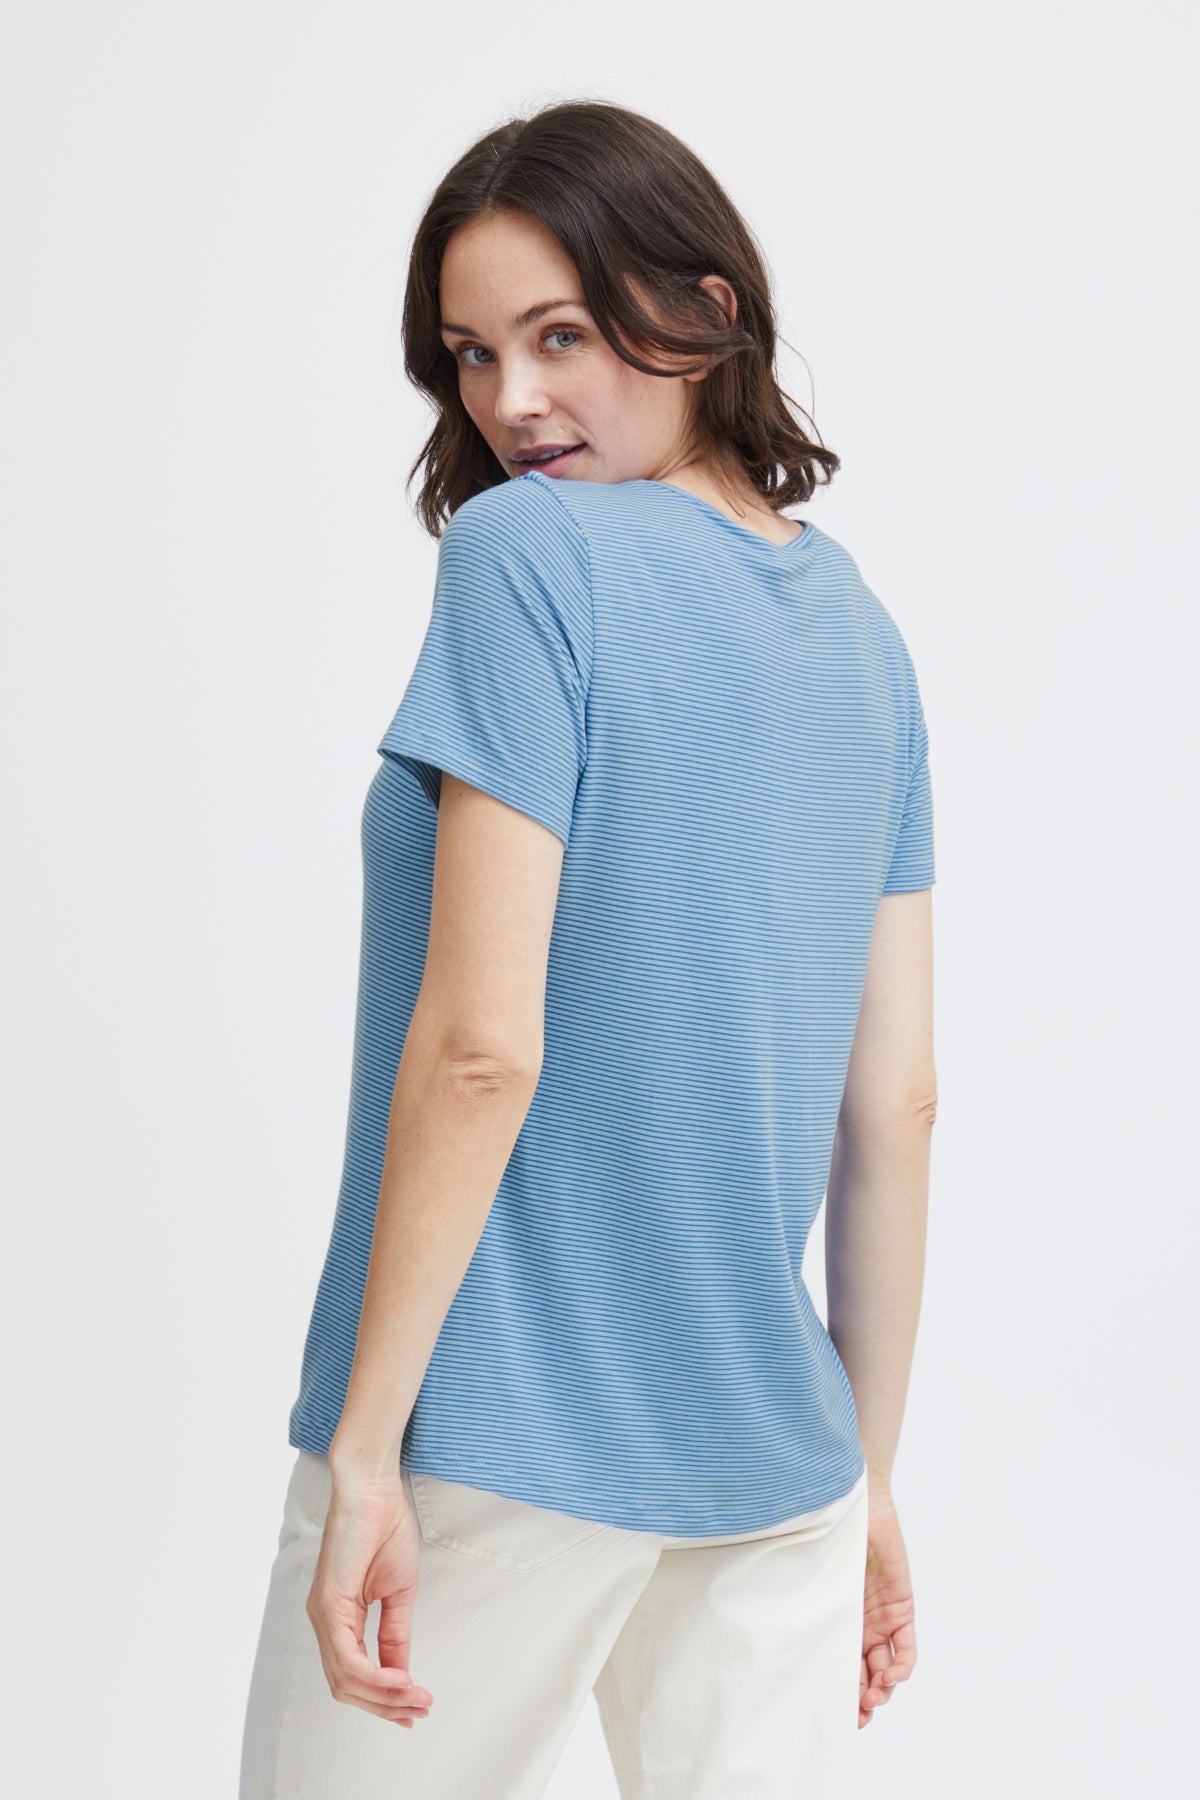 Fransa FRBOBO TEE 1, Beaucoup Blue mix